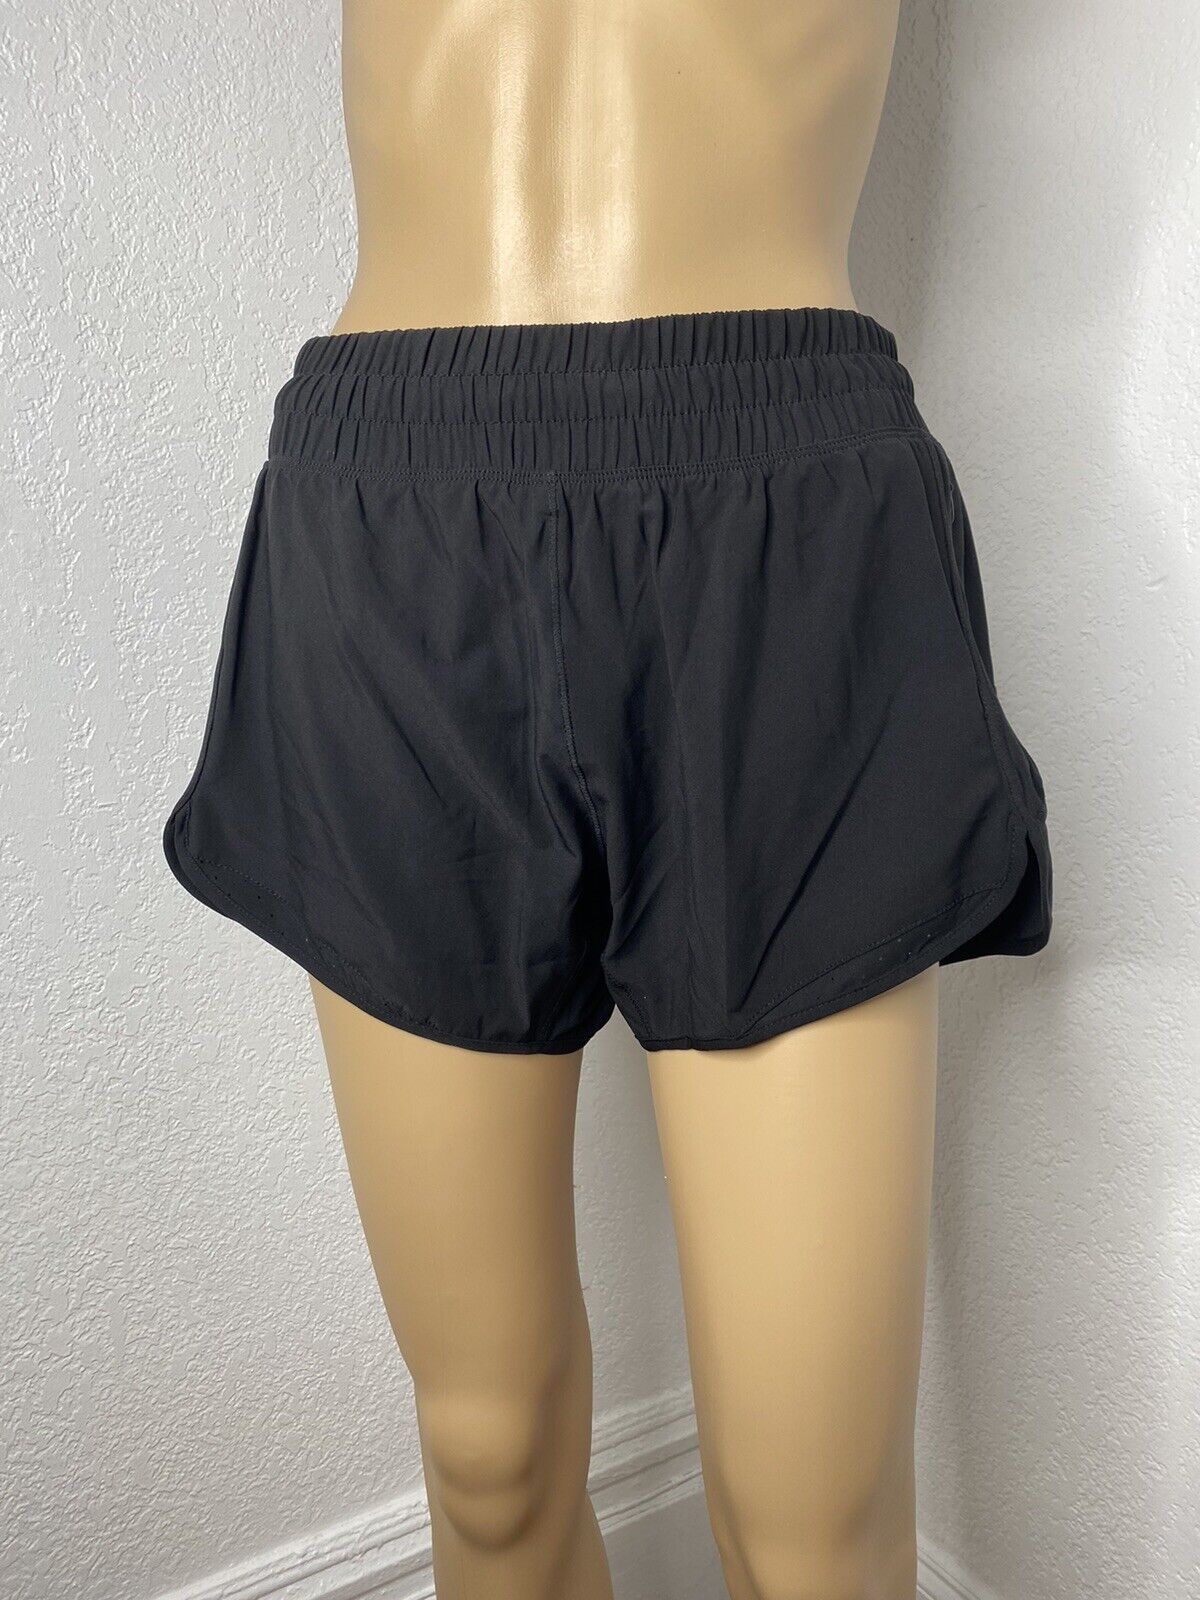 Tasc Recess 4 Inch Athletic Short Women’s Size M Black Style TW708-001 NWT